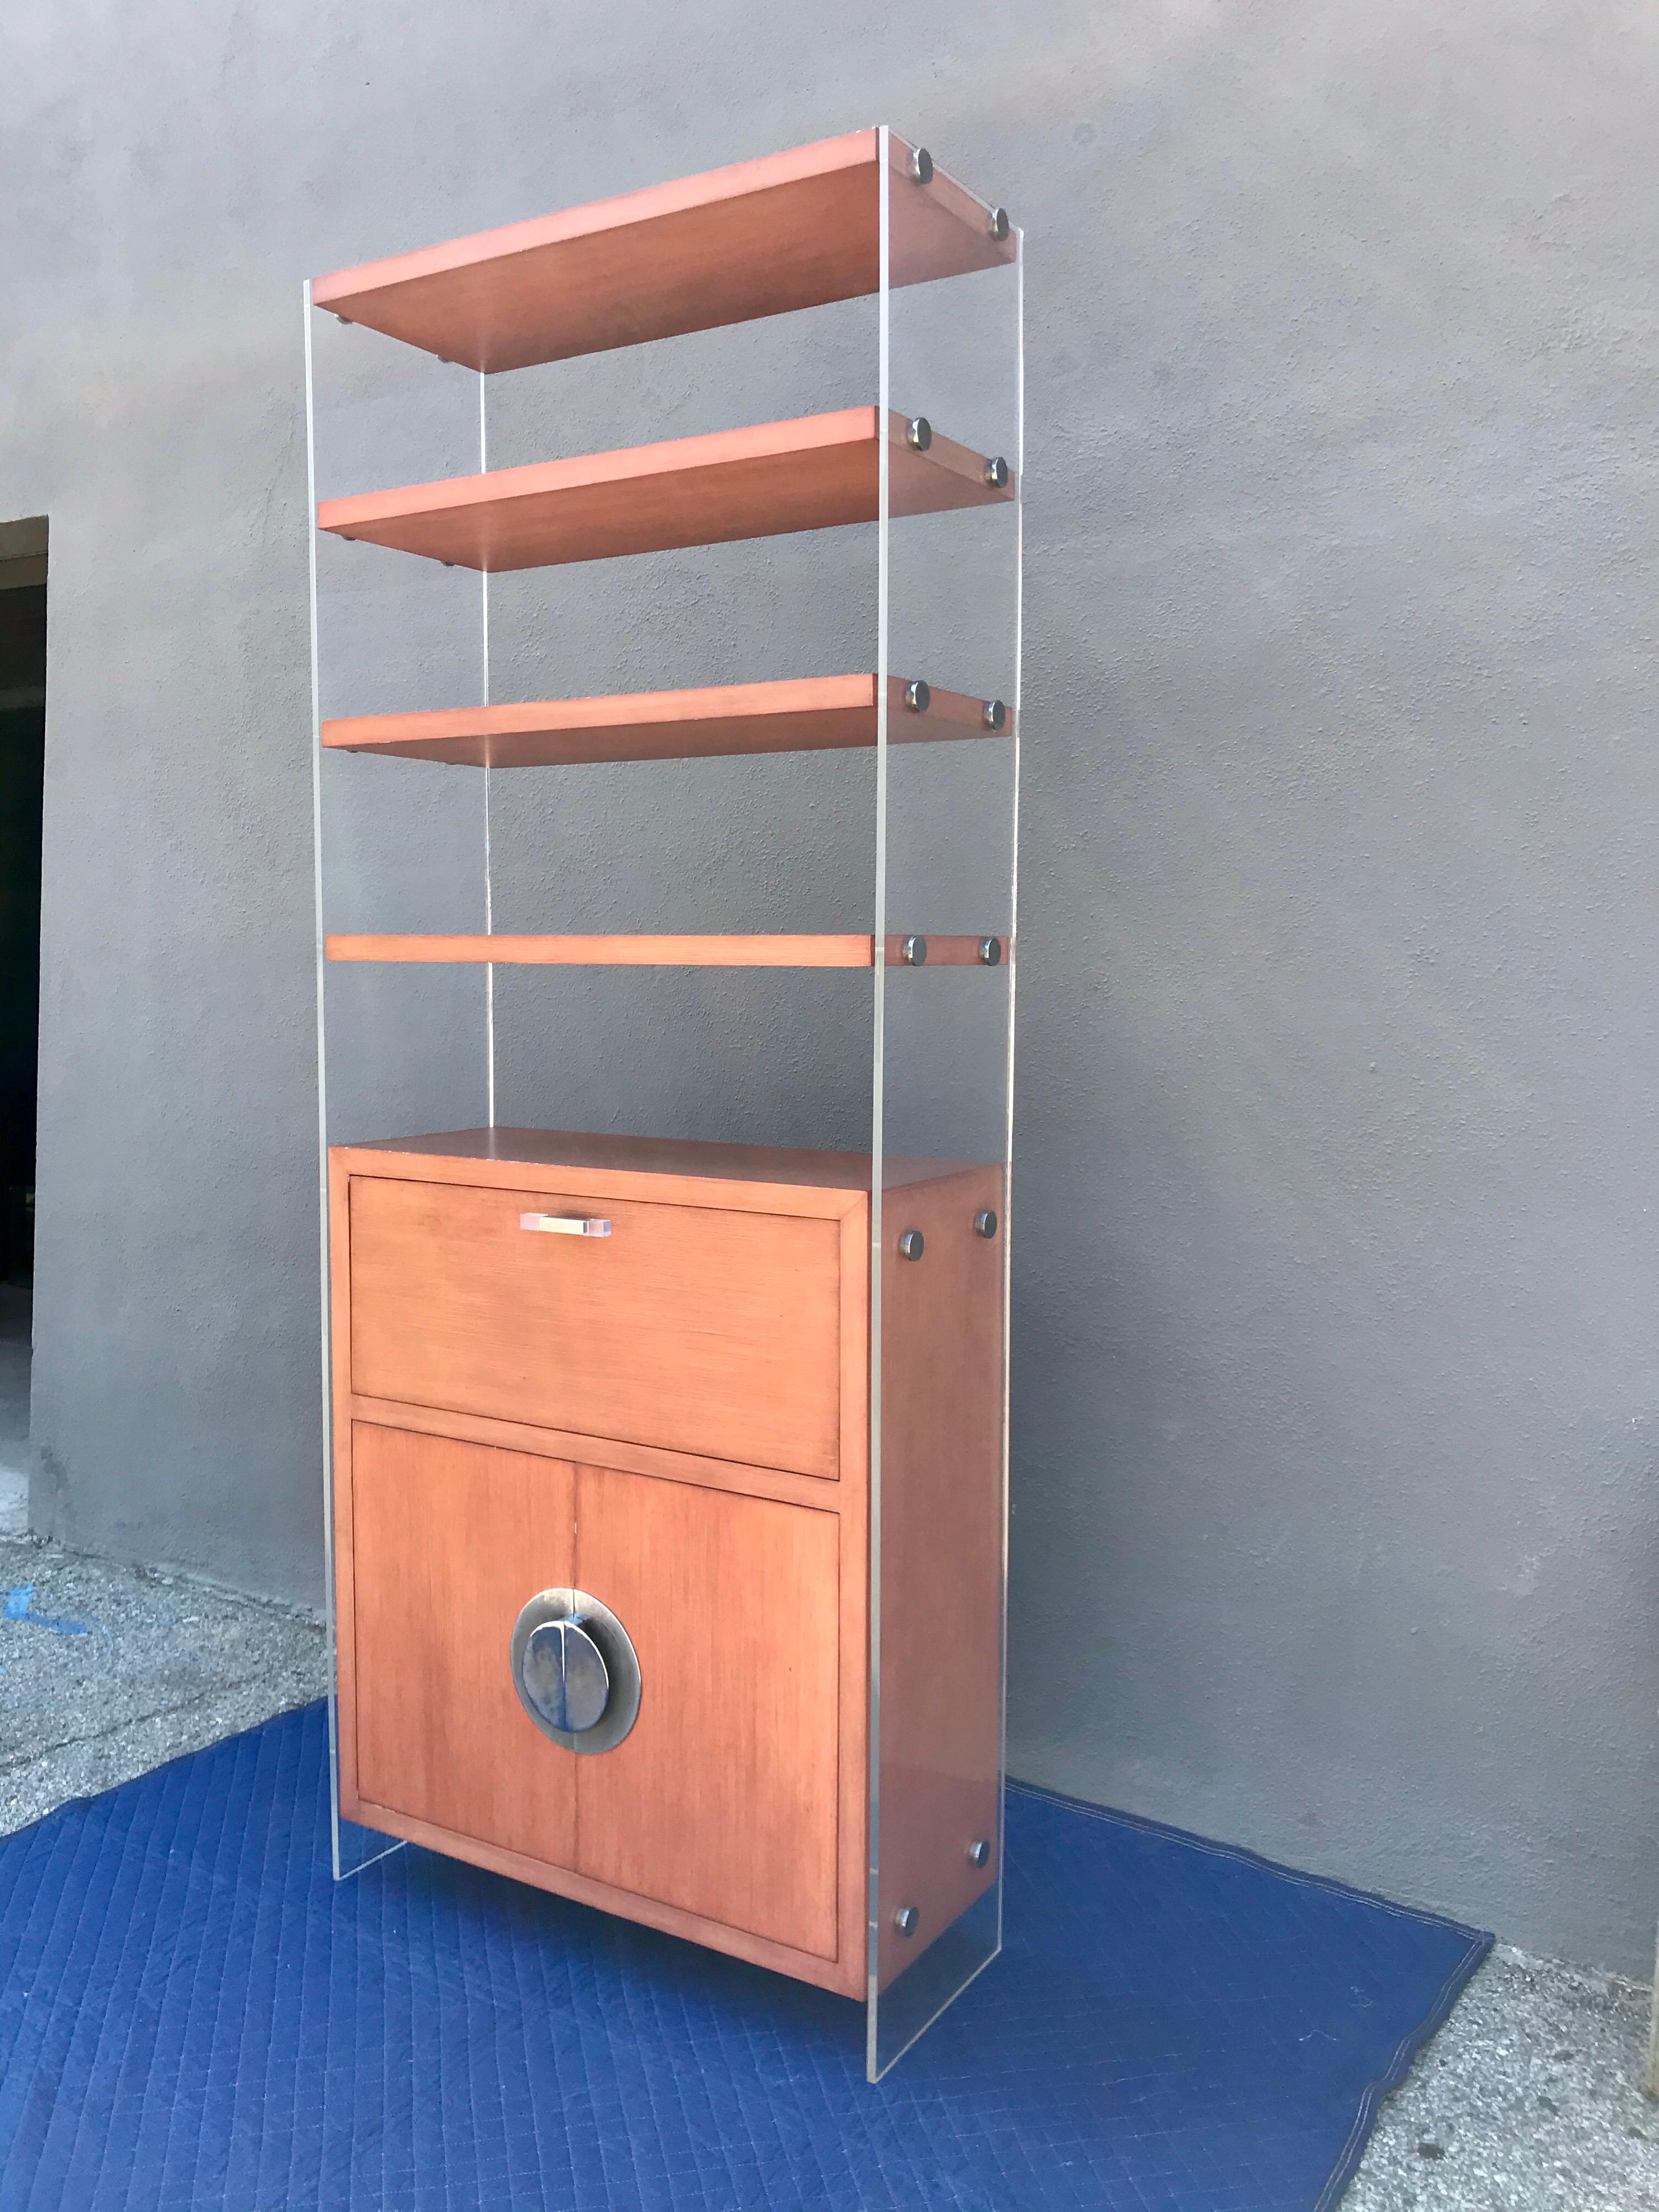 A timeless architectural design.
Lacquered plywood with Lucite and steel hardware.
Great for many uses; design accent, storage, display small art objects, and even a dry bar.
Original vintage condition, no damage or repairs, minor wear (barely